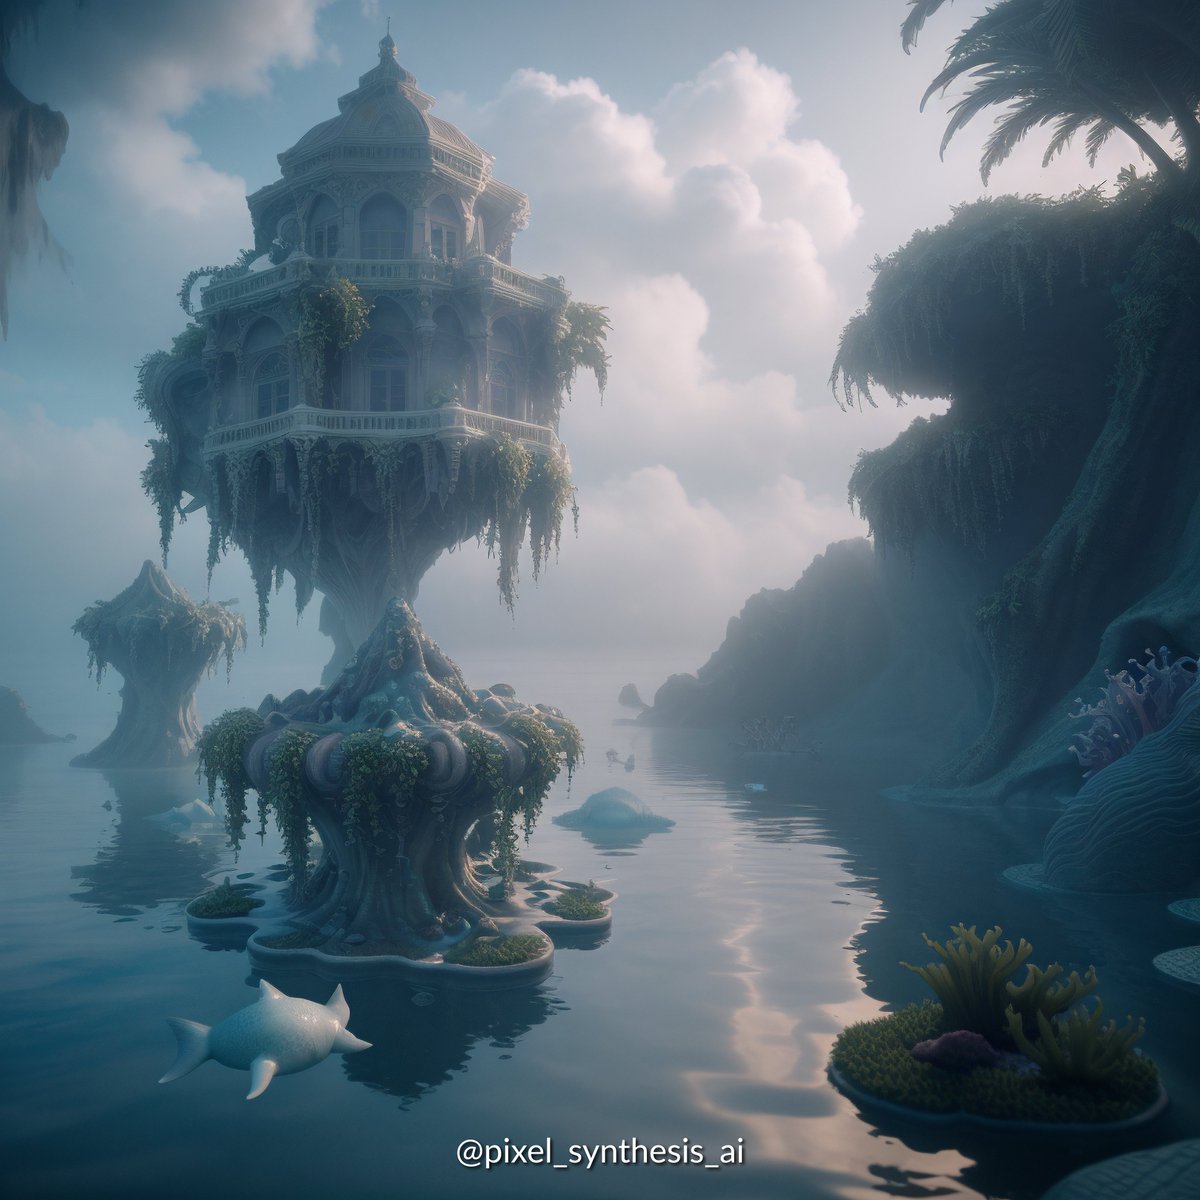 Embark on a journey to the 'Floating Oasis', created by AI 🌊☁️✨.
#aiart #aigeneratedart #stablediffusionart #sdxl #huggingface #openai #chatgpt #civitai #airender #digitalart #masterpiece #aiimage #aiimagery #oasis #floatingoasis #dreamplace #aiartist #aiartistry #aidesign